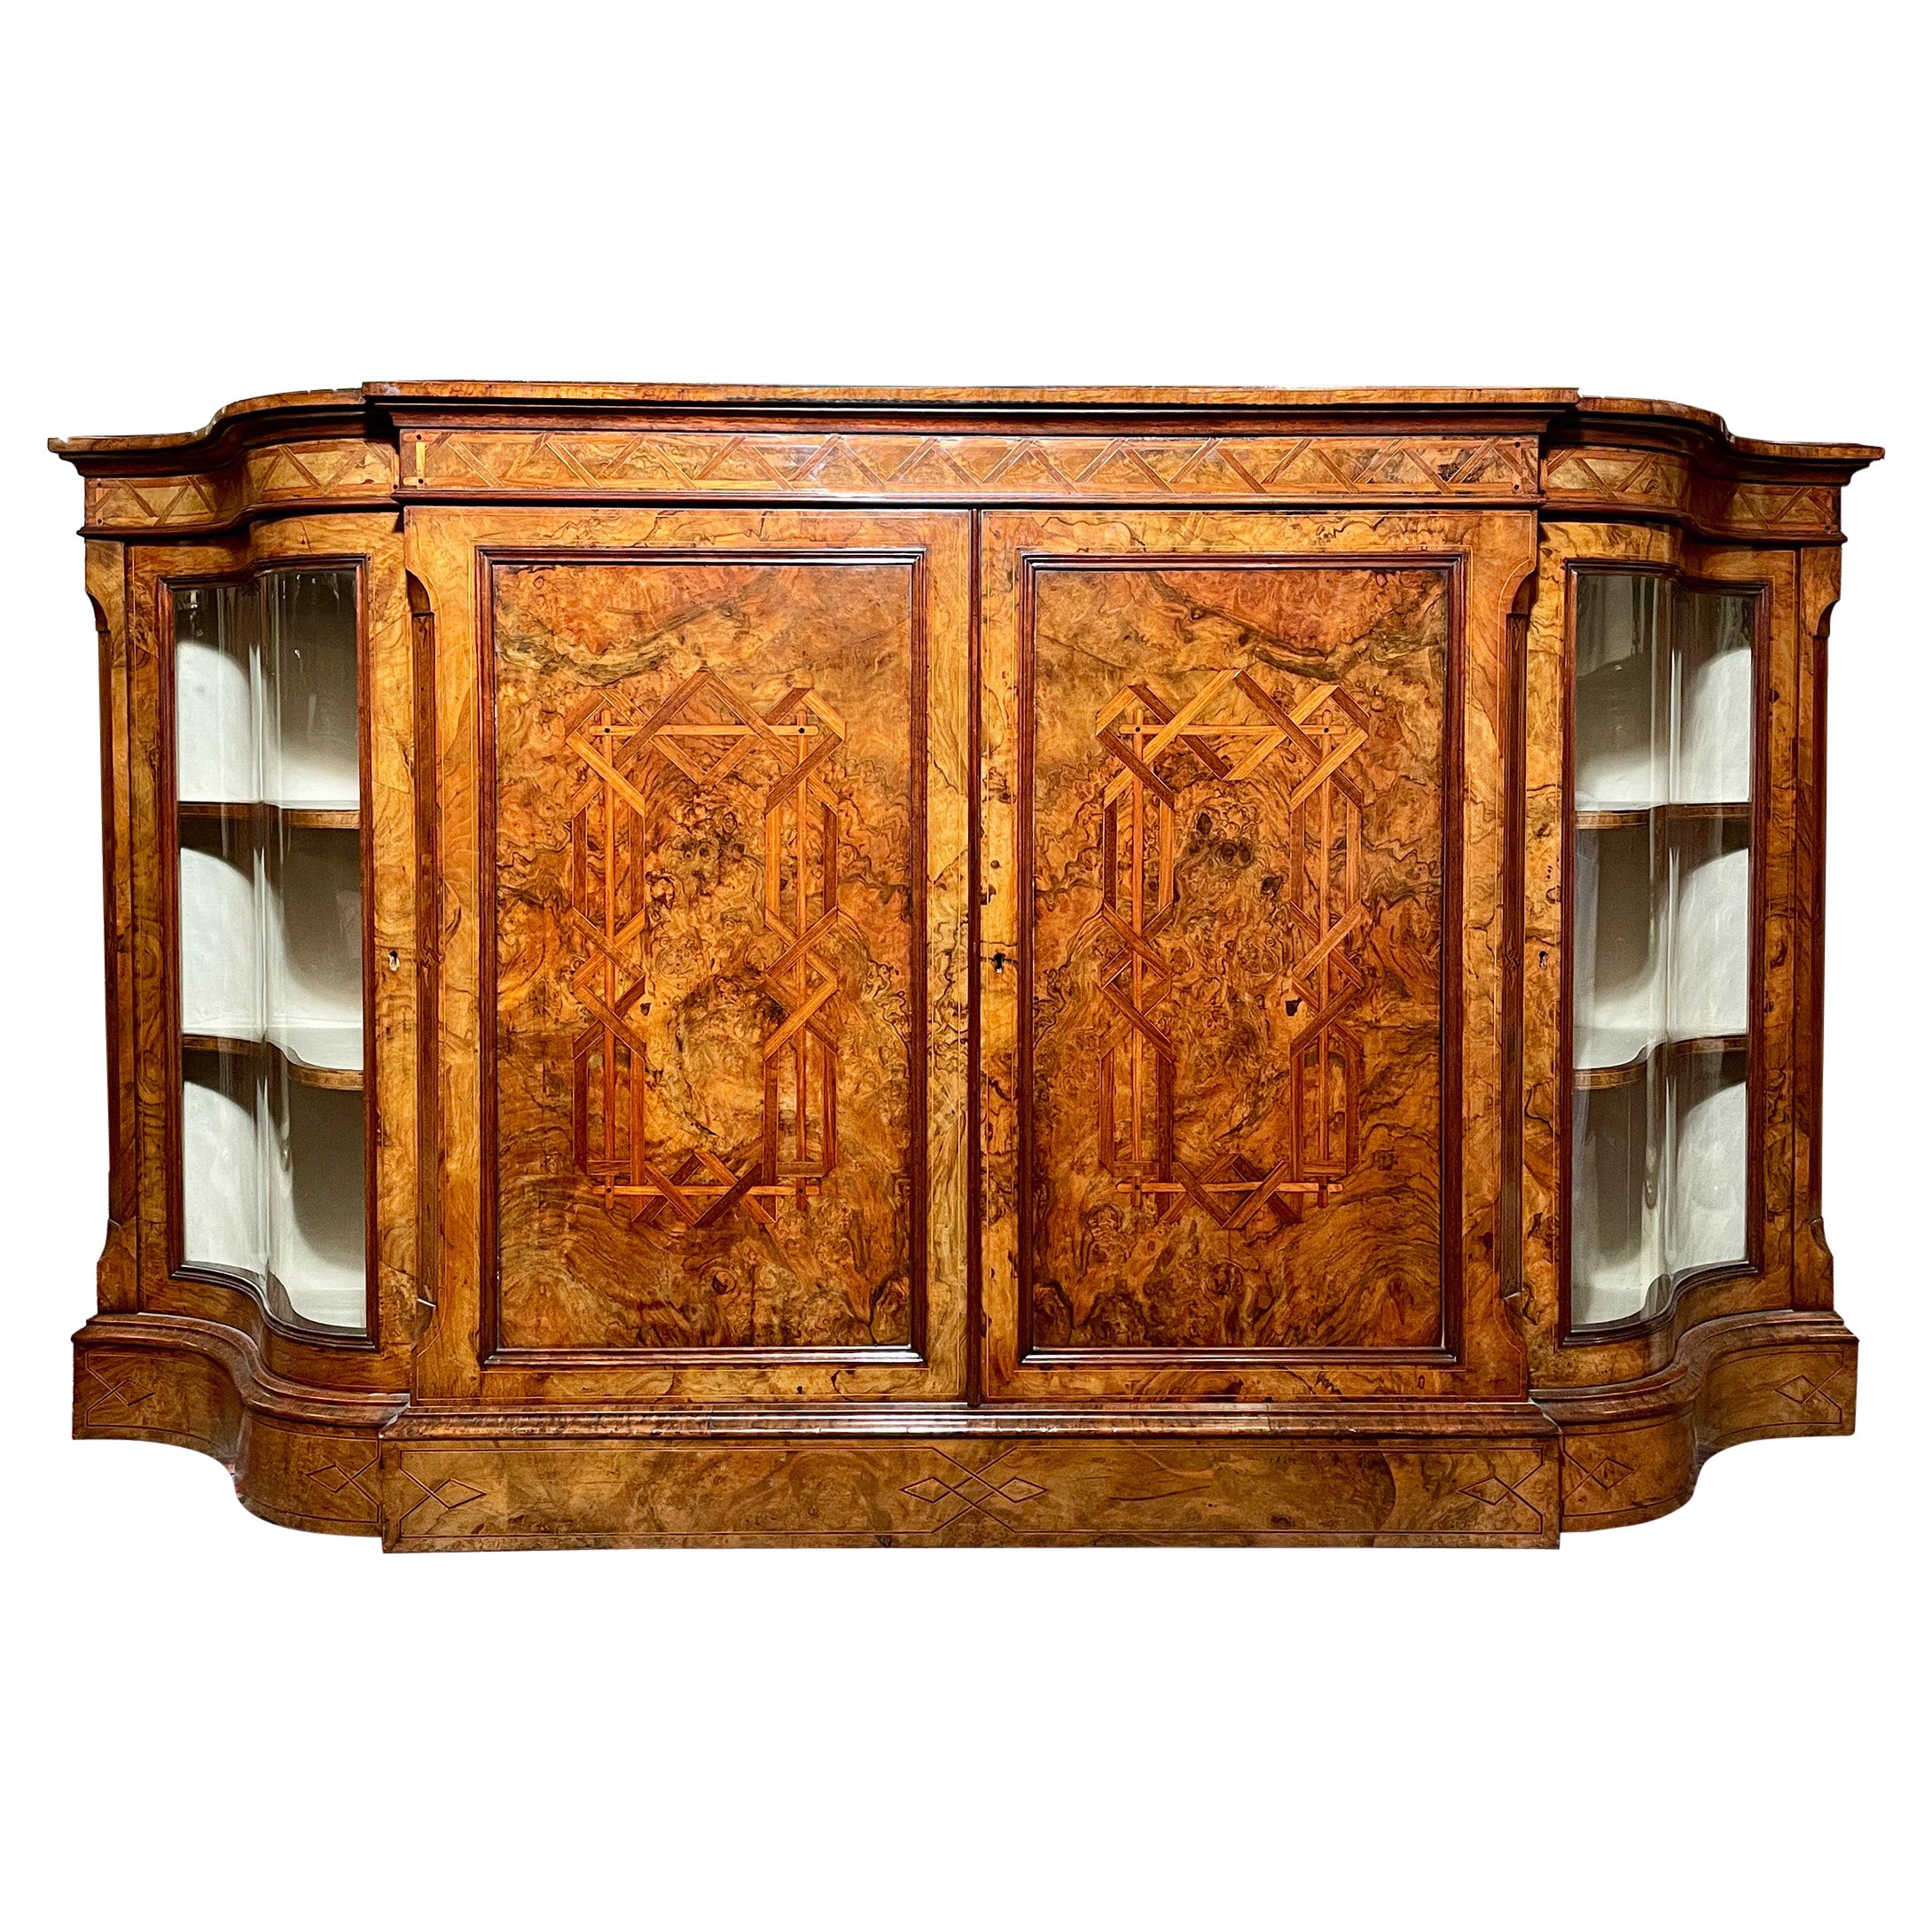 Antique English Mahogany with Inlay Serpentine Shaped Credenza, Circa 1865-1875 For Sale